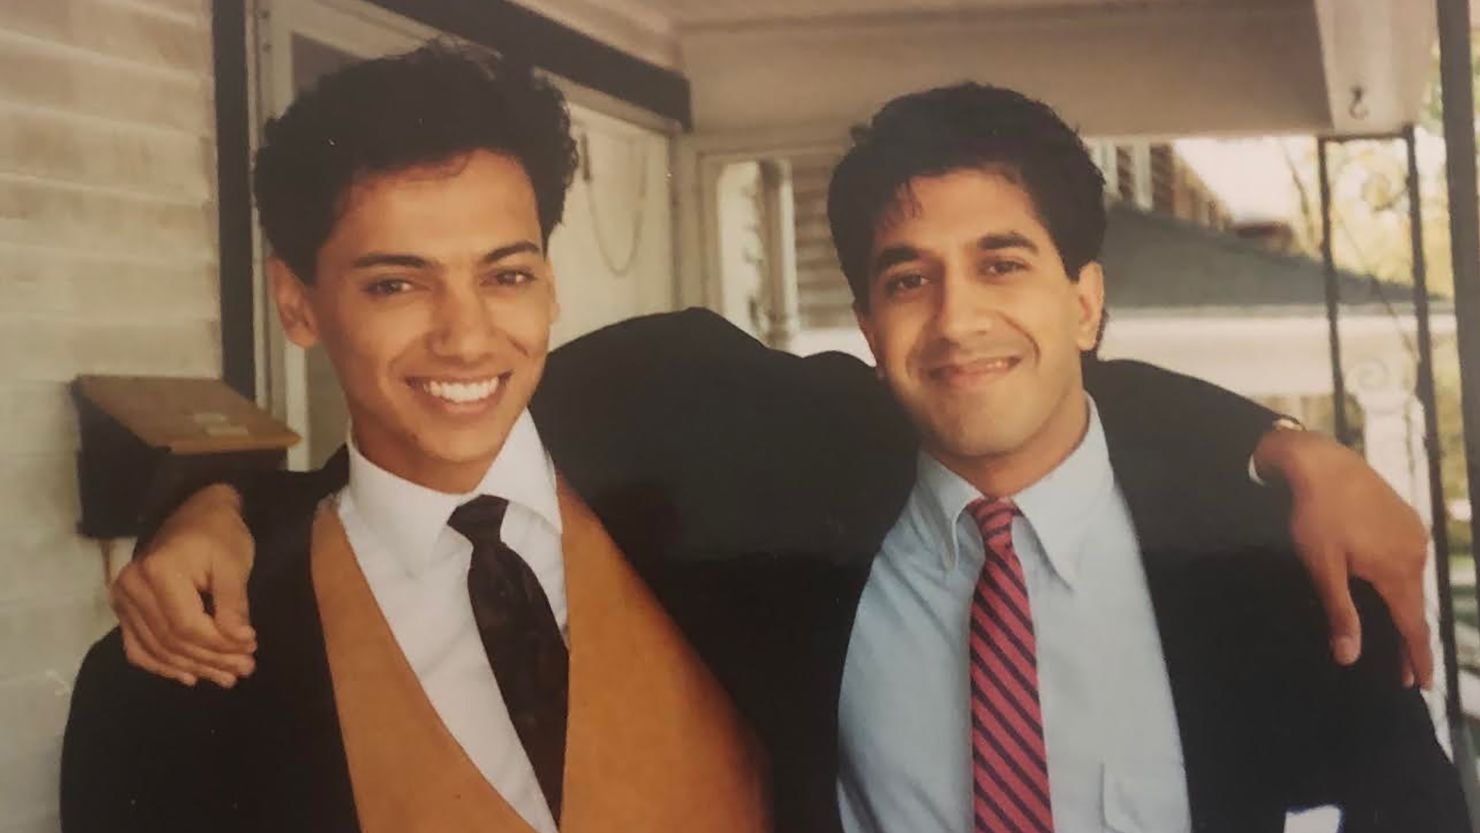 For my best friend Sujit (left) and me, being over 40 was unimaginable when were were teenagers. But now that I'm in my 50s, I can say life continues to get better. Here's what I'd tell anyone afraid of growing older: Talk to people in other generations and you just might be surprised by what you learn!